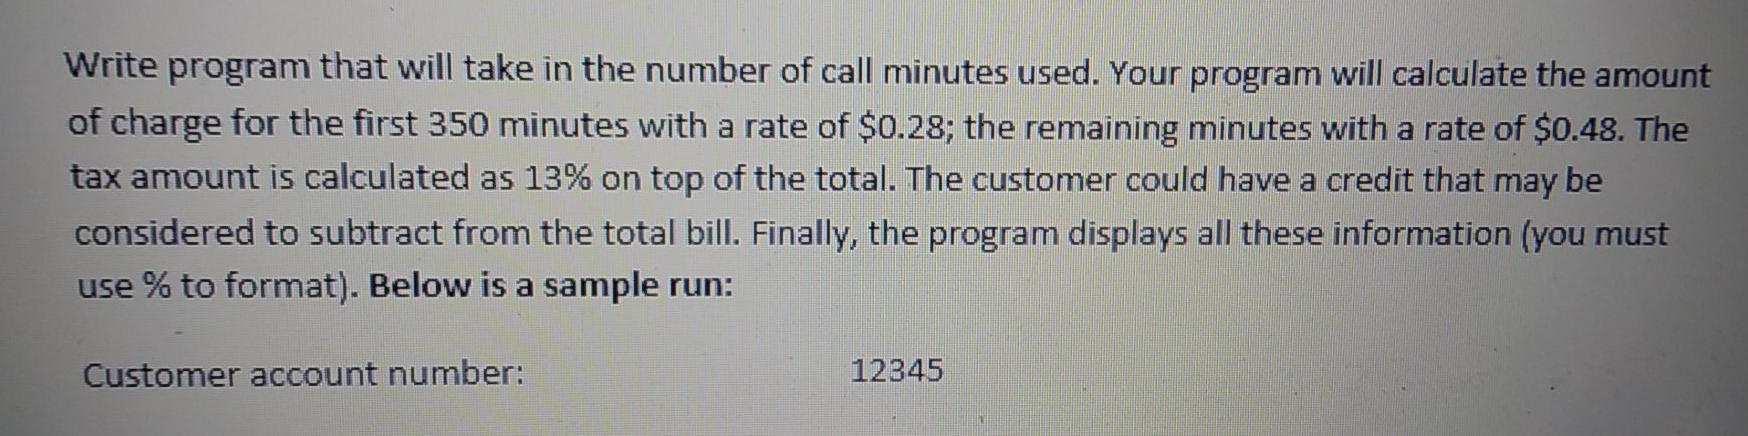 Write program that will take in the number of call minutes used. Your program will calculate the amount of